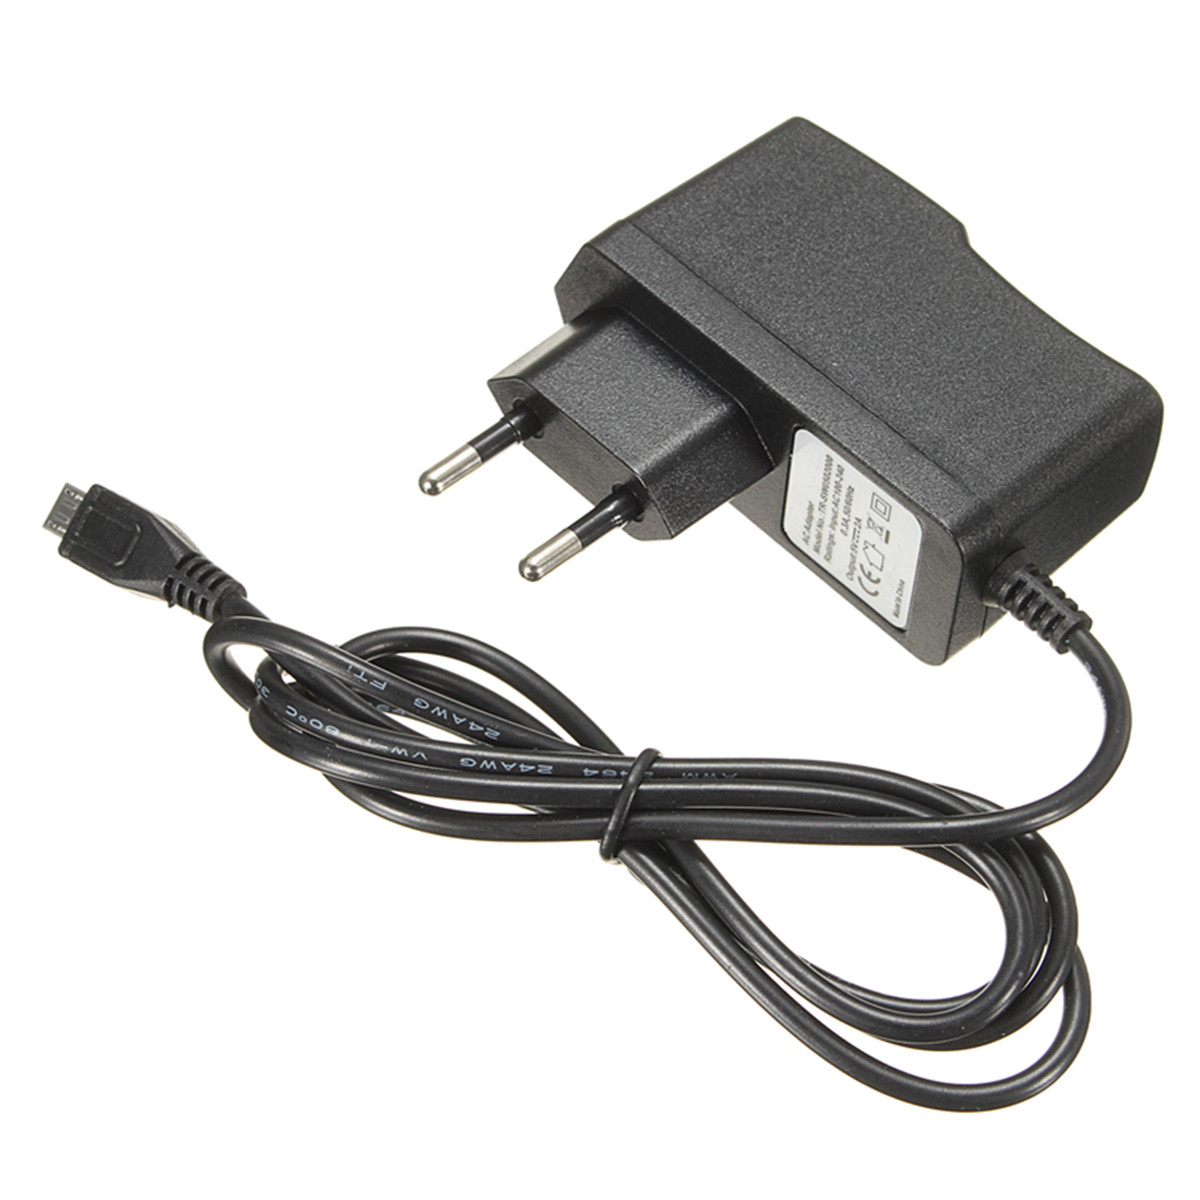 NES-Classic-Mini-AC-Charger-Adapter-for-Nintendo-Classic-Mini-Edition-Power-Supply-Charger-1363885-5